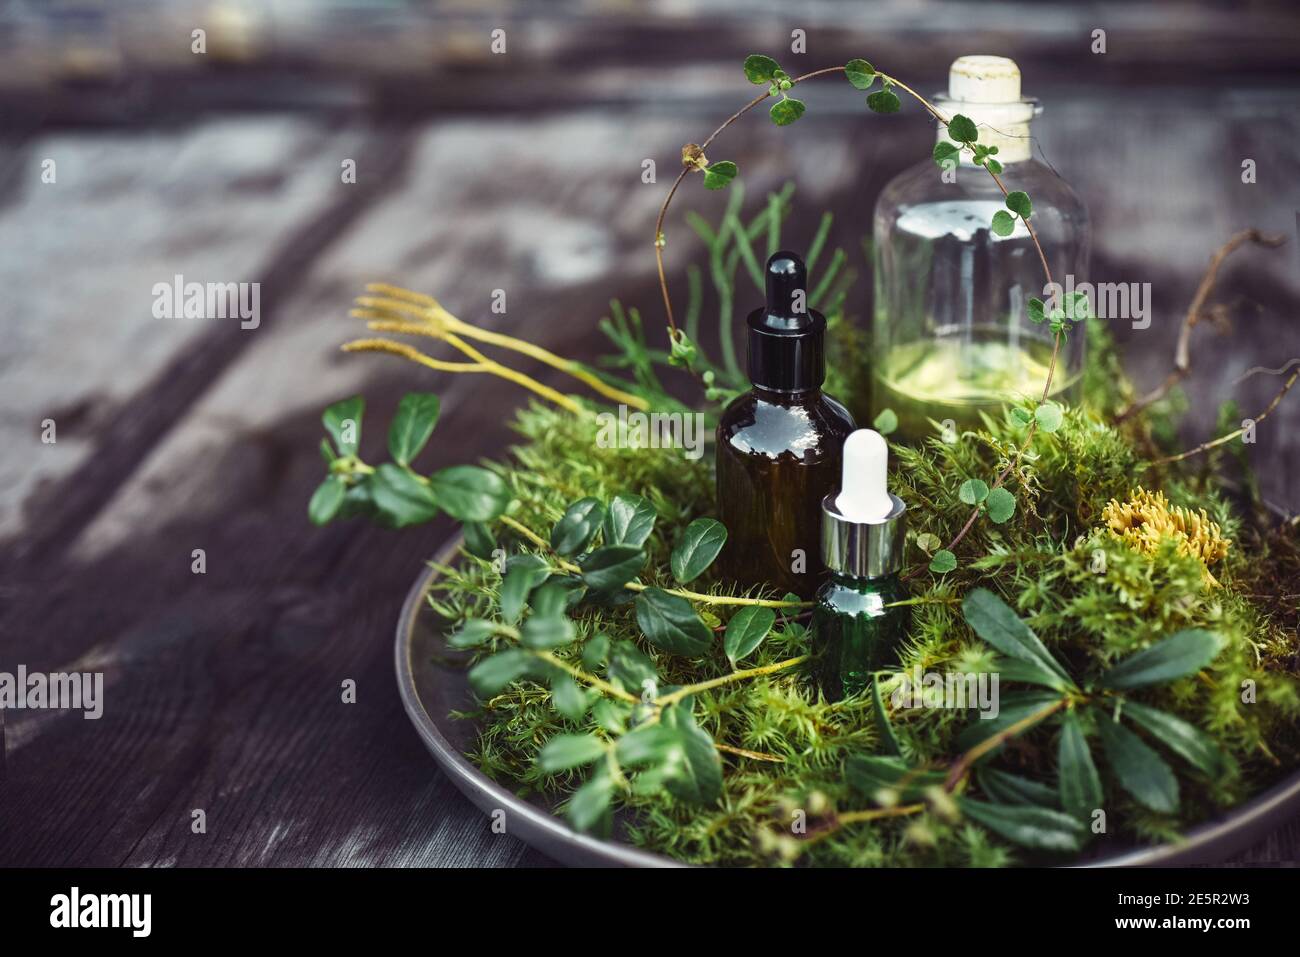 Bottles with natural cosmetic serum oils for face and body care with fresh plants on wooden background. Organic spa cosmetics concept Stock Photo